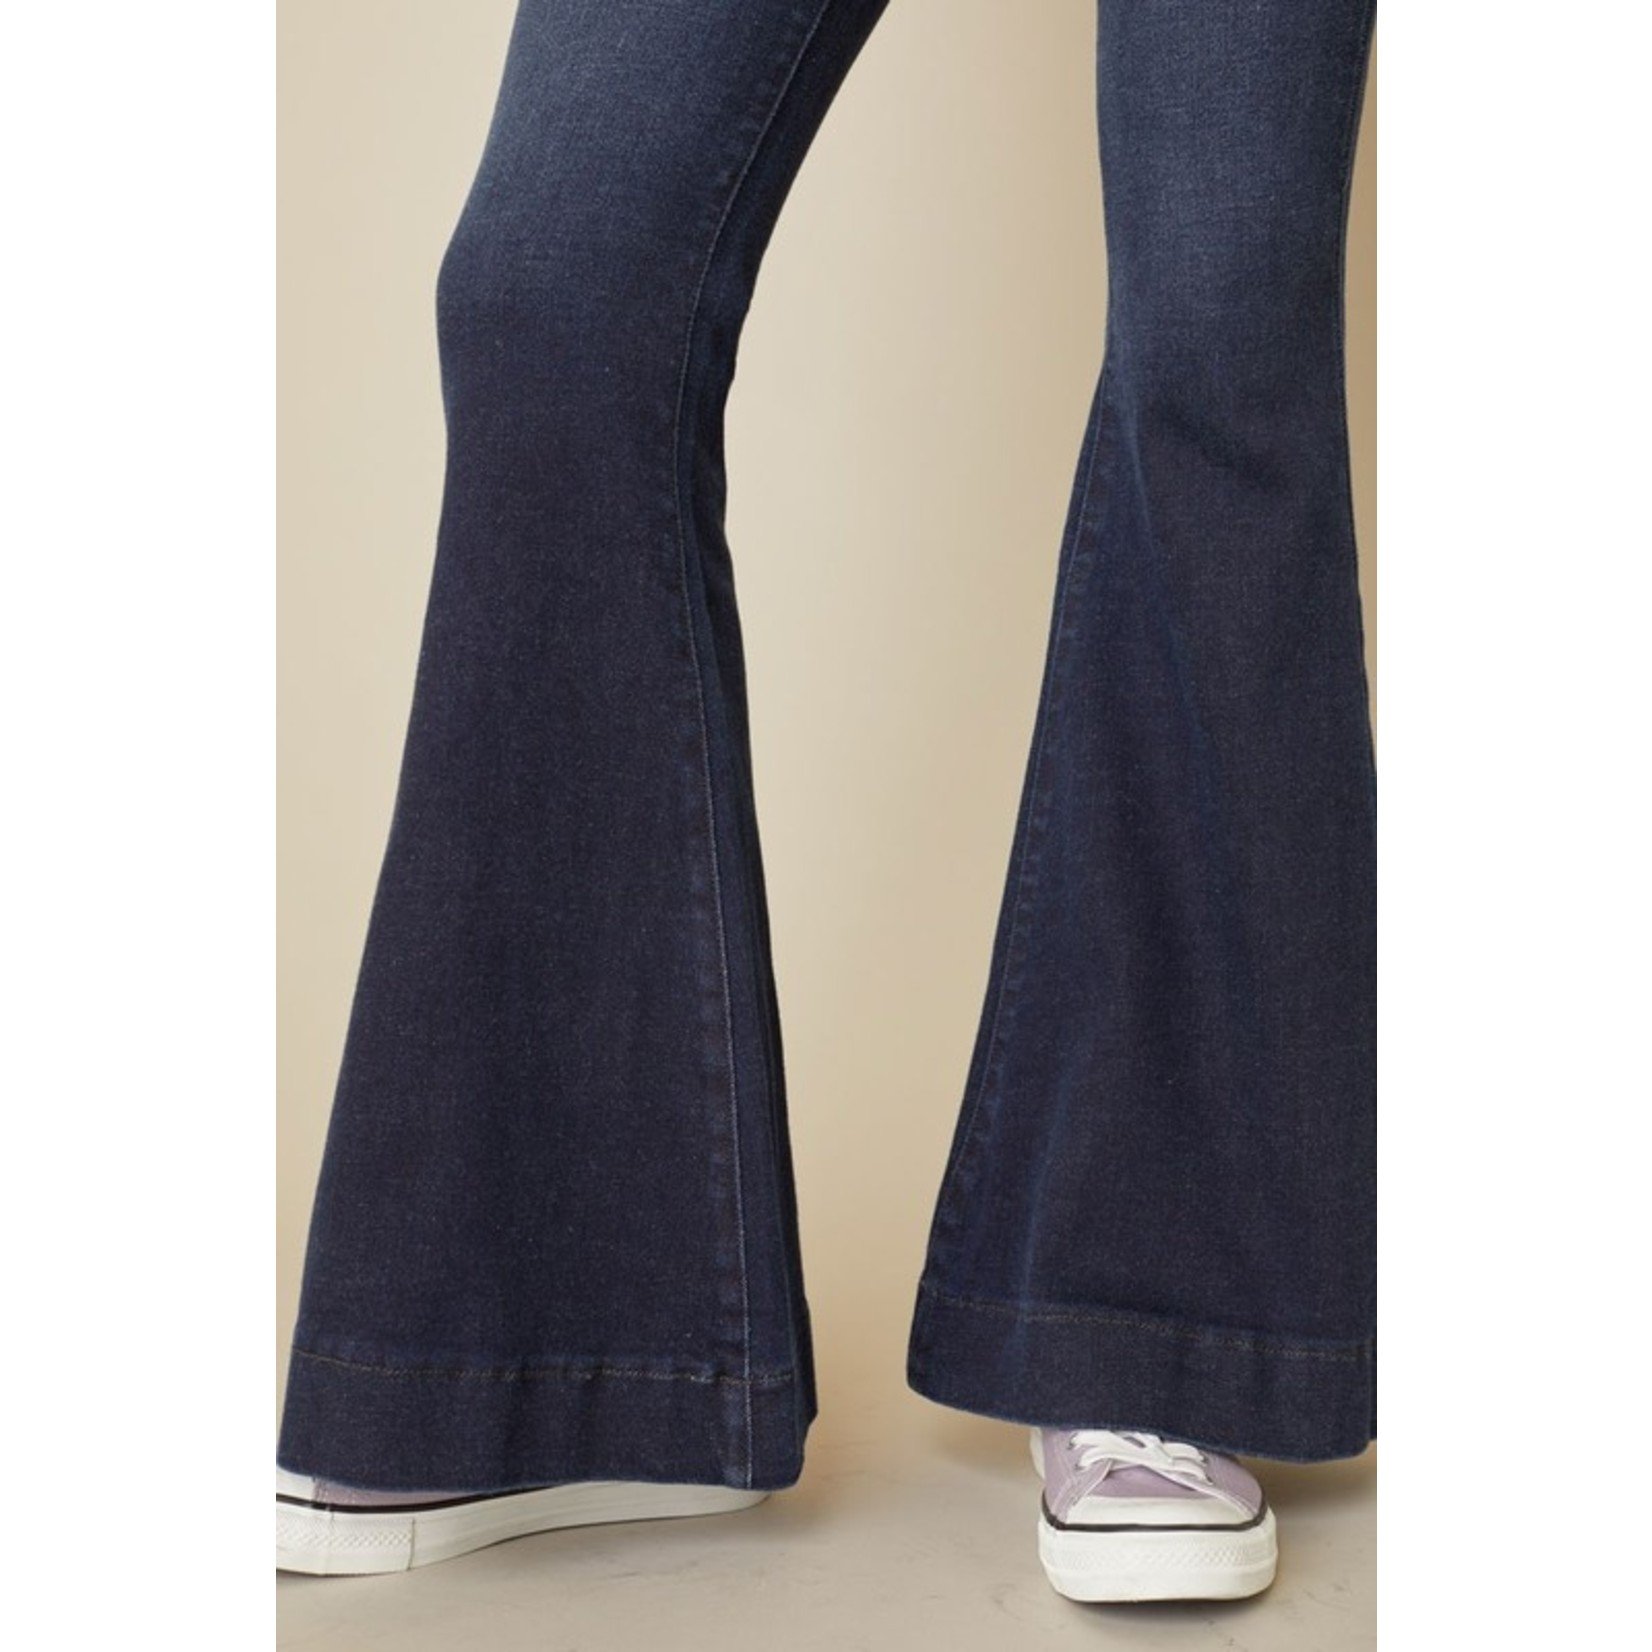 The Northwest Button Fly Flare Jeans